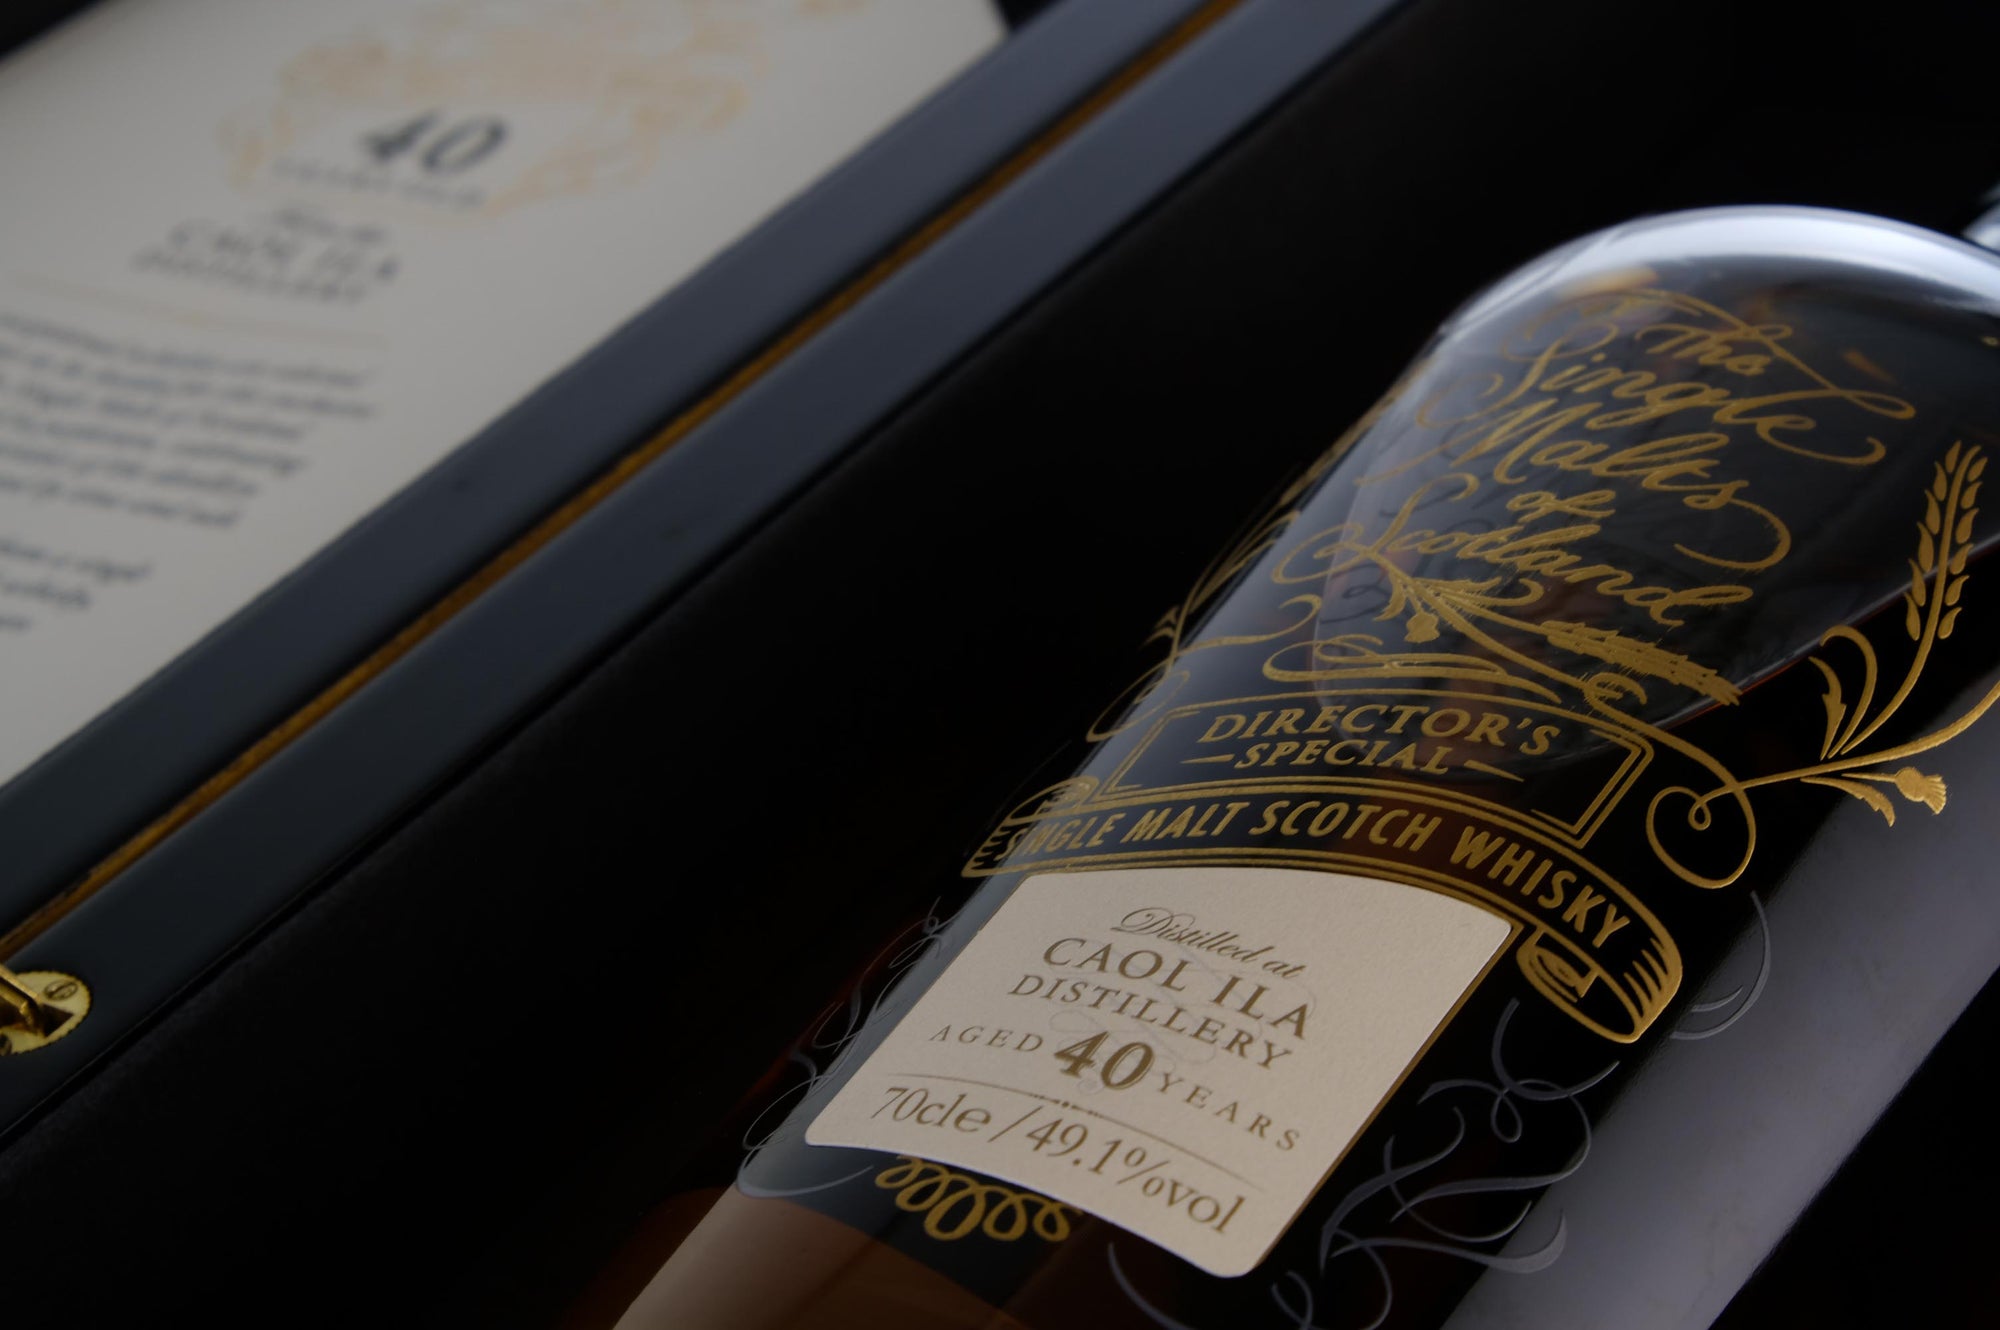 Caol Ila 40 Year Old | The Single Malts Of Scotland | Director's Special